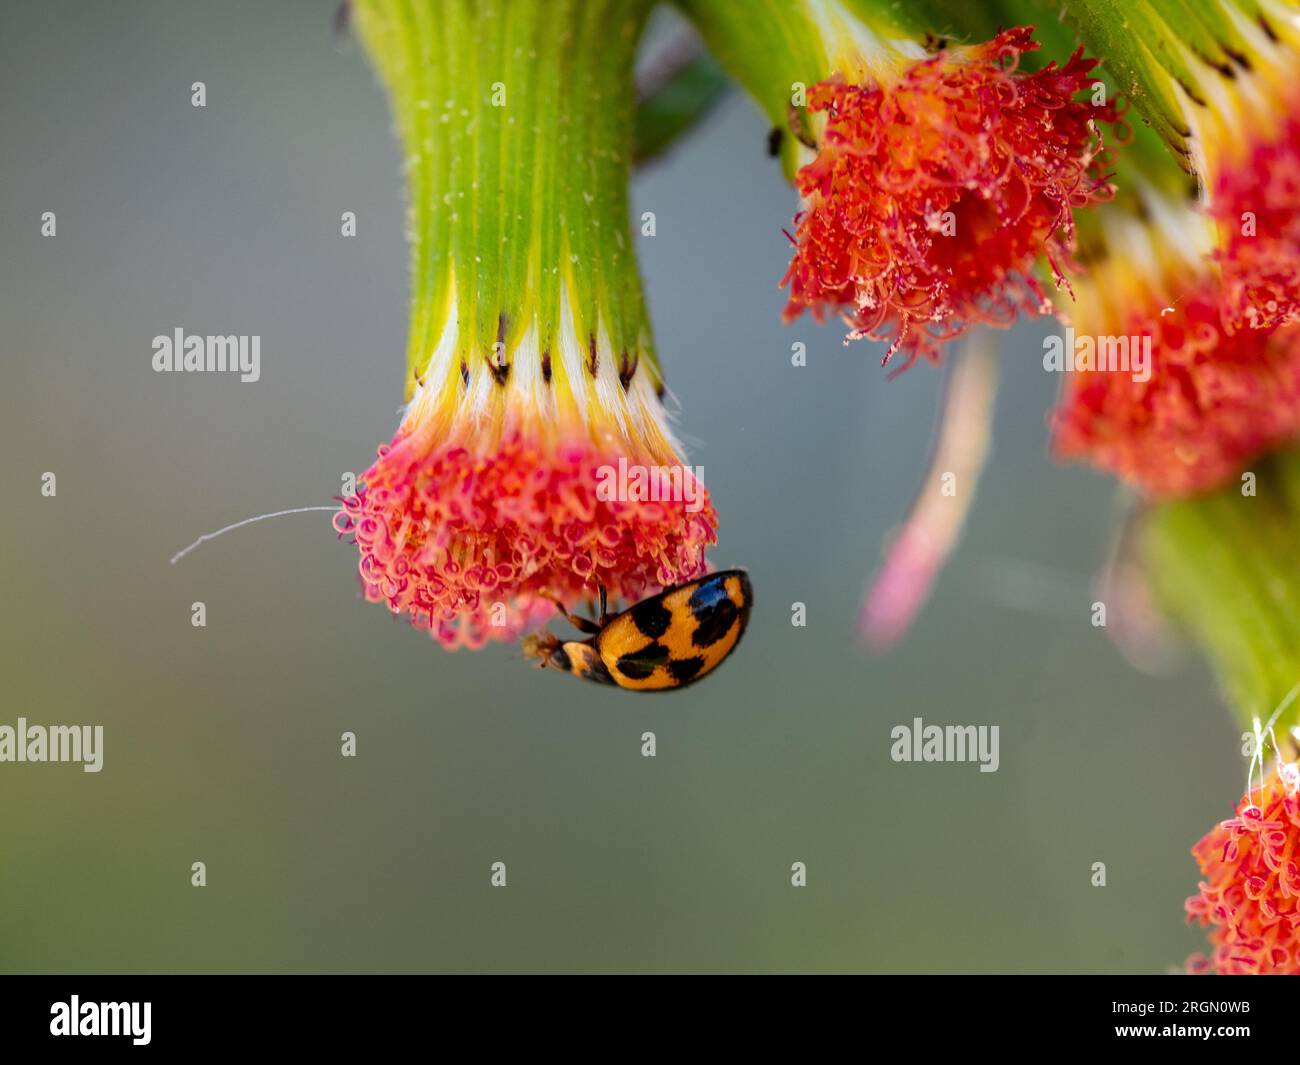 Lady Beetle upside down on a pretty red weed flower Stock Photo